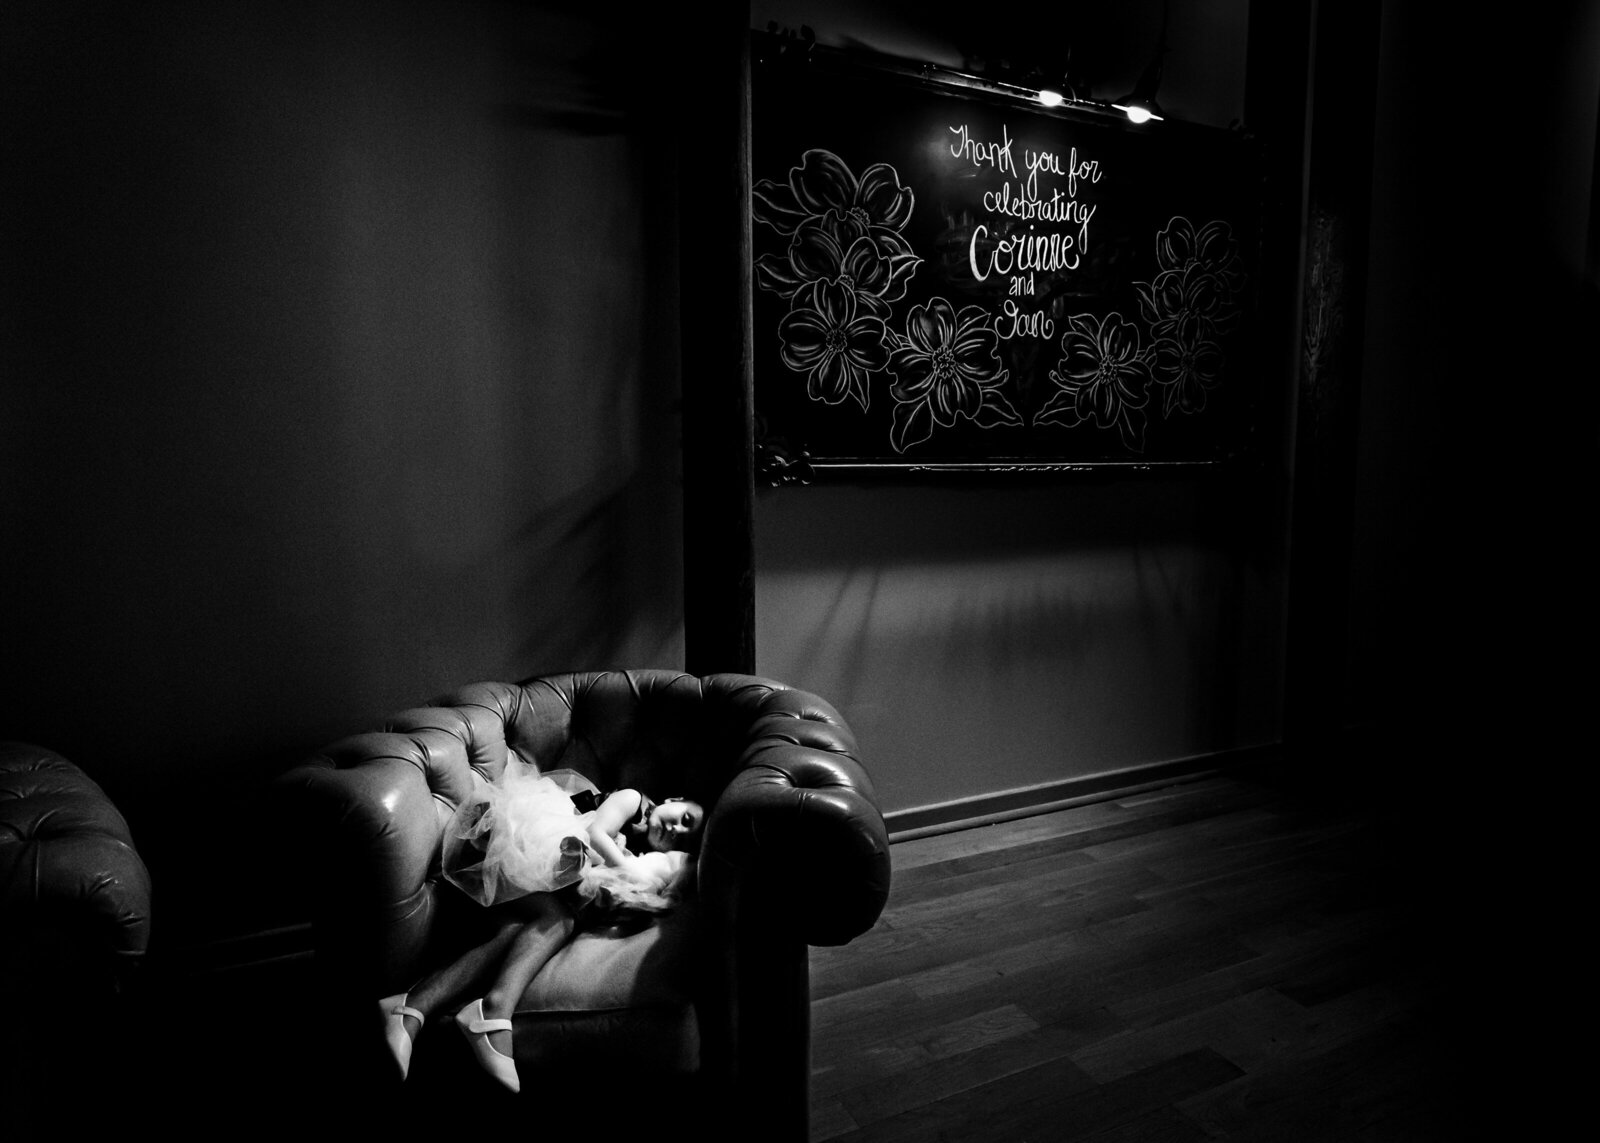 flower girl is pictured asleep in a chair in front of a chalkboard welcoming guests to the wedding reception